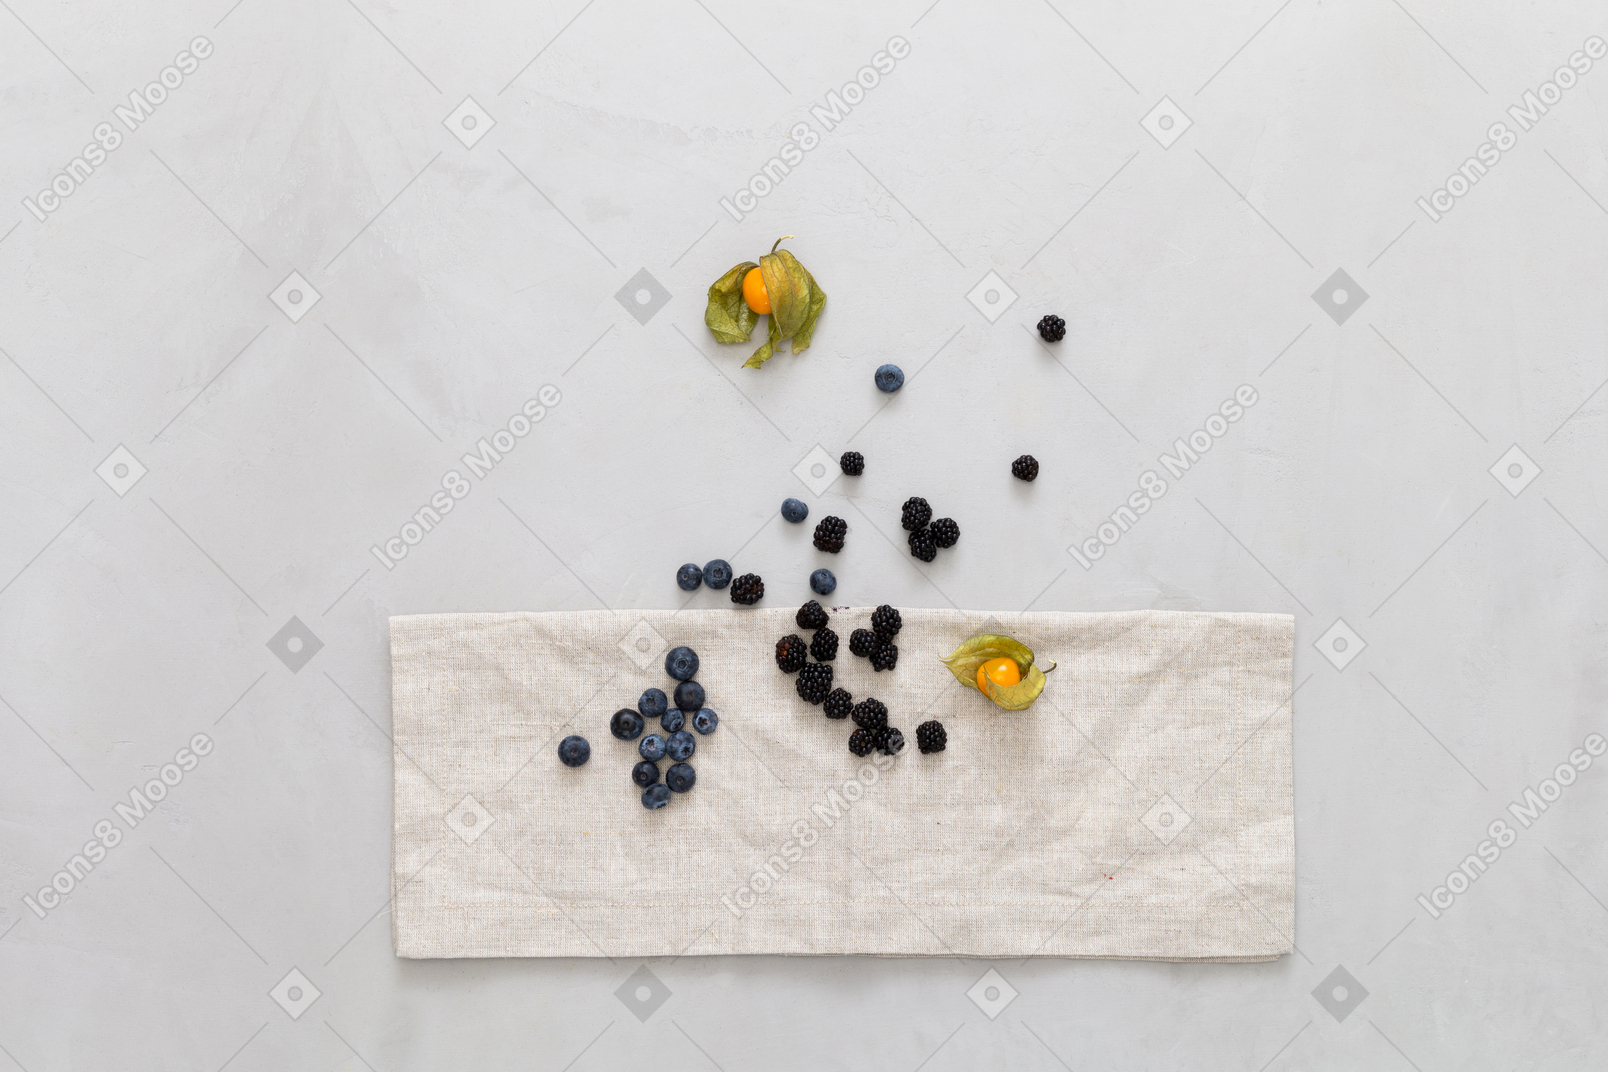 Blueberries and physalis on a linen tablecloth